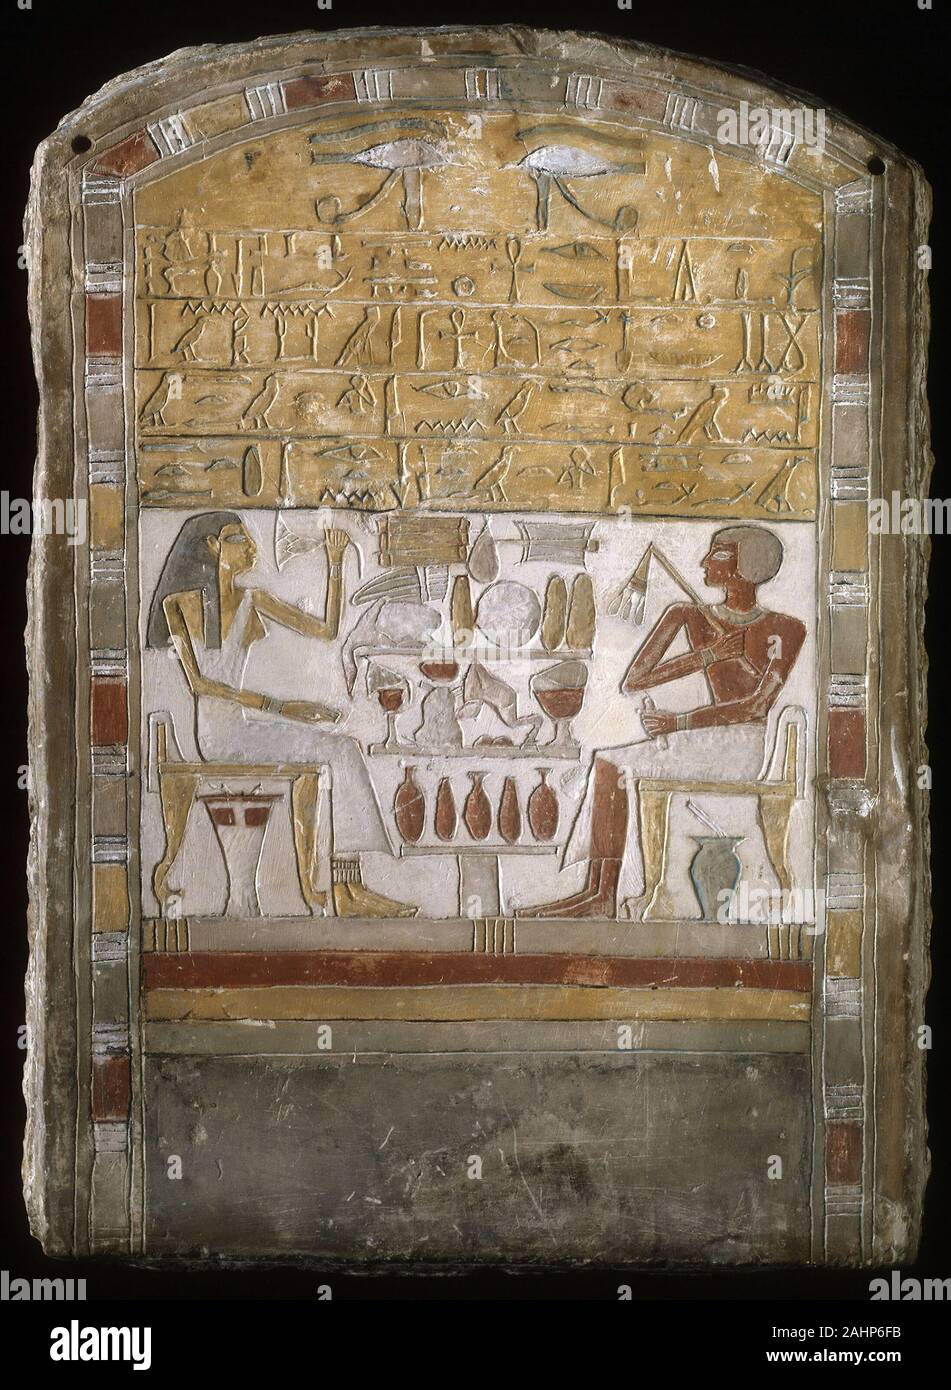 Ancient Egyptian. Stela of Amenemhat and Yatu. 1870 BC–1770 BC. Egypt. Limestone and pigment This stela, or decorated stone monument, depicts a man named Amenemhat seated across from his mother Yatu. A table covered in offerings including bread, meat, and drinks separates them. Amenemhat is portrayed holding a flywhisk, a sign of authority. A blue stone jar designed to hold kohl (eye paint) with an applicator sticking out of its top is shown under his chair. An ointment container is depicted beneath the chair of Yatu, who holds a lotus blossom to her nose. In ancient Egypt, the lotus was a sym Stock Photo